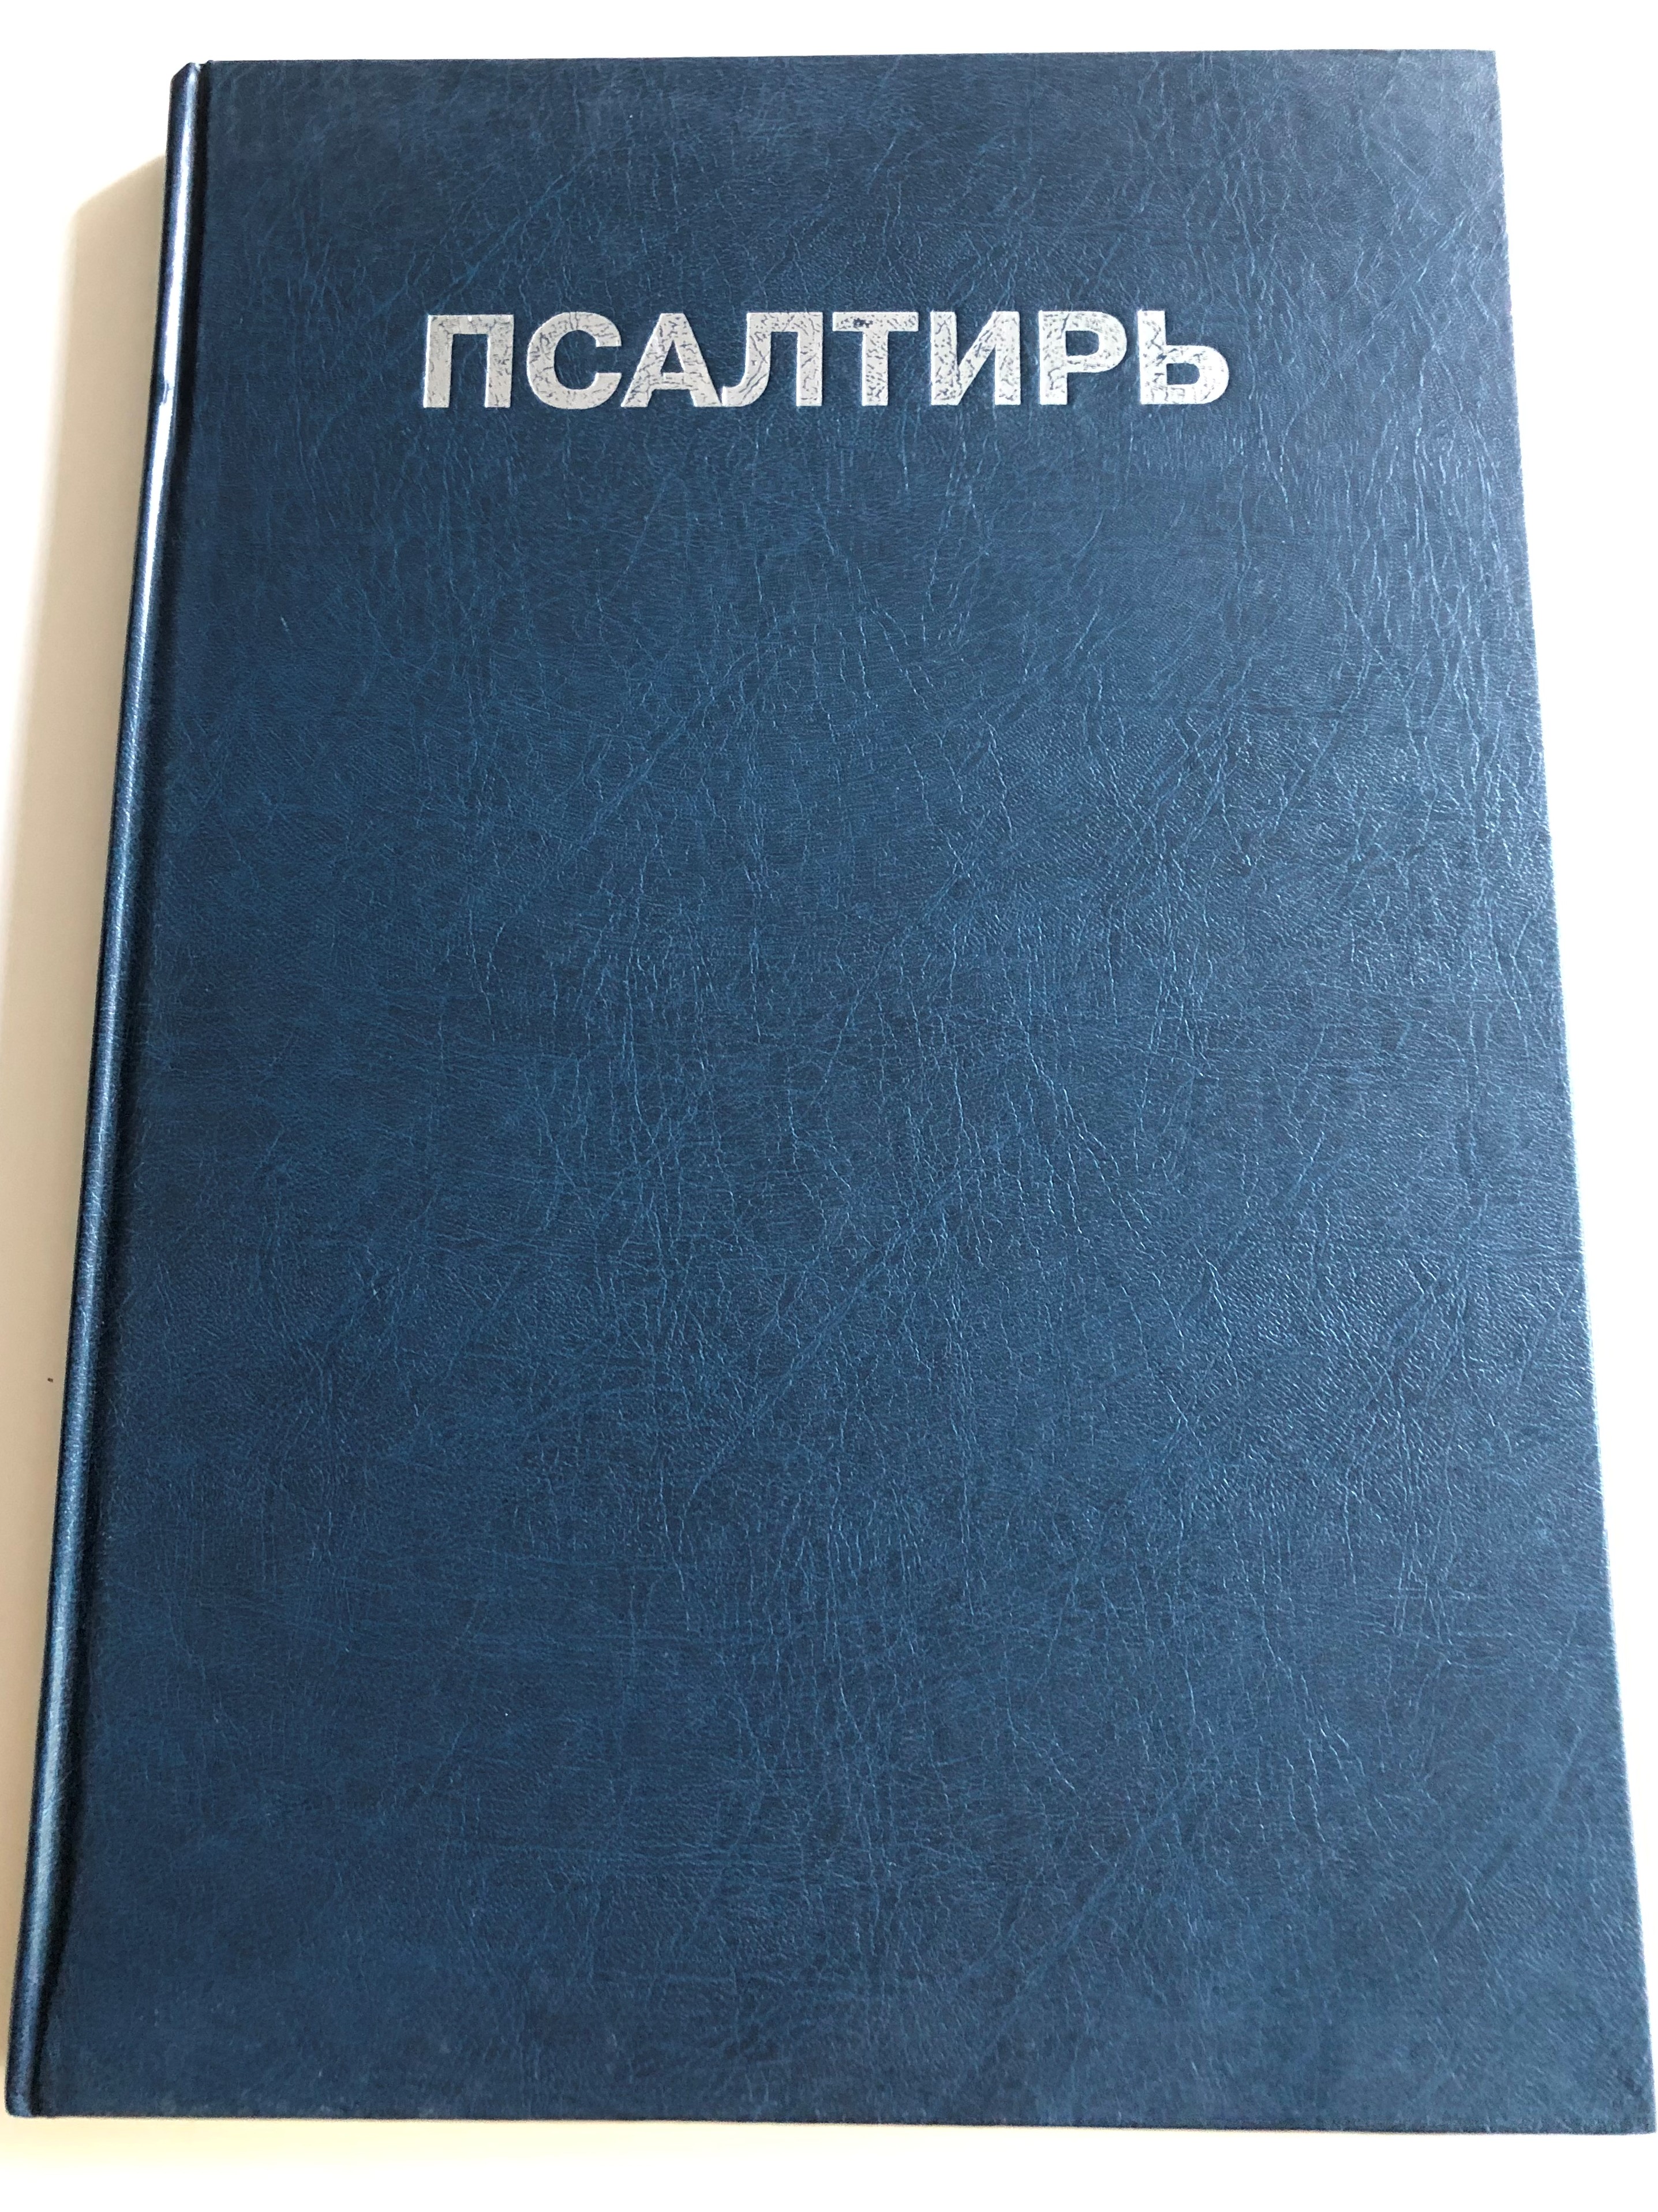 large-print-russian-psalter-the-book-of-psalms-in-russian-russian-bible-society-1999-hardcover-1-.jpg